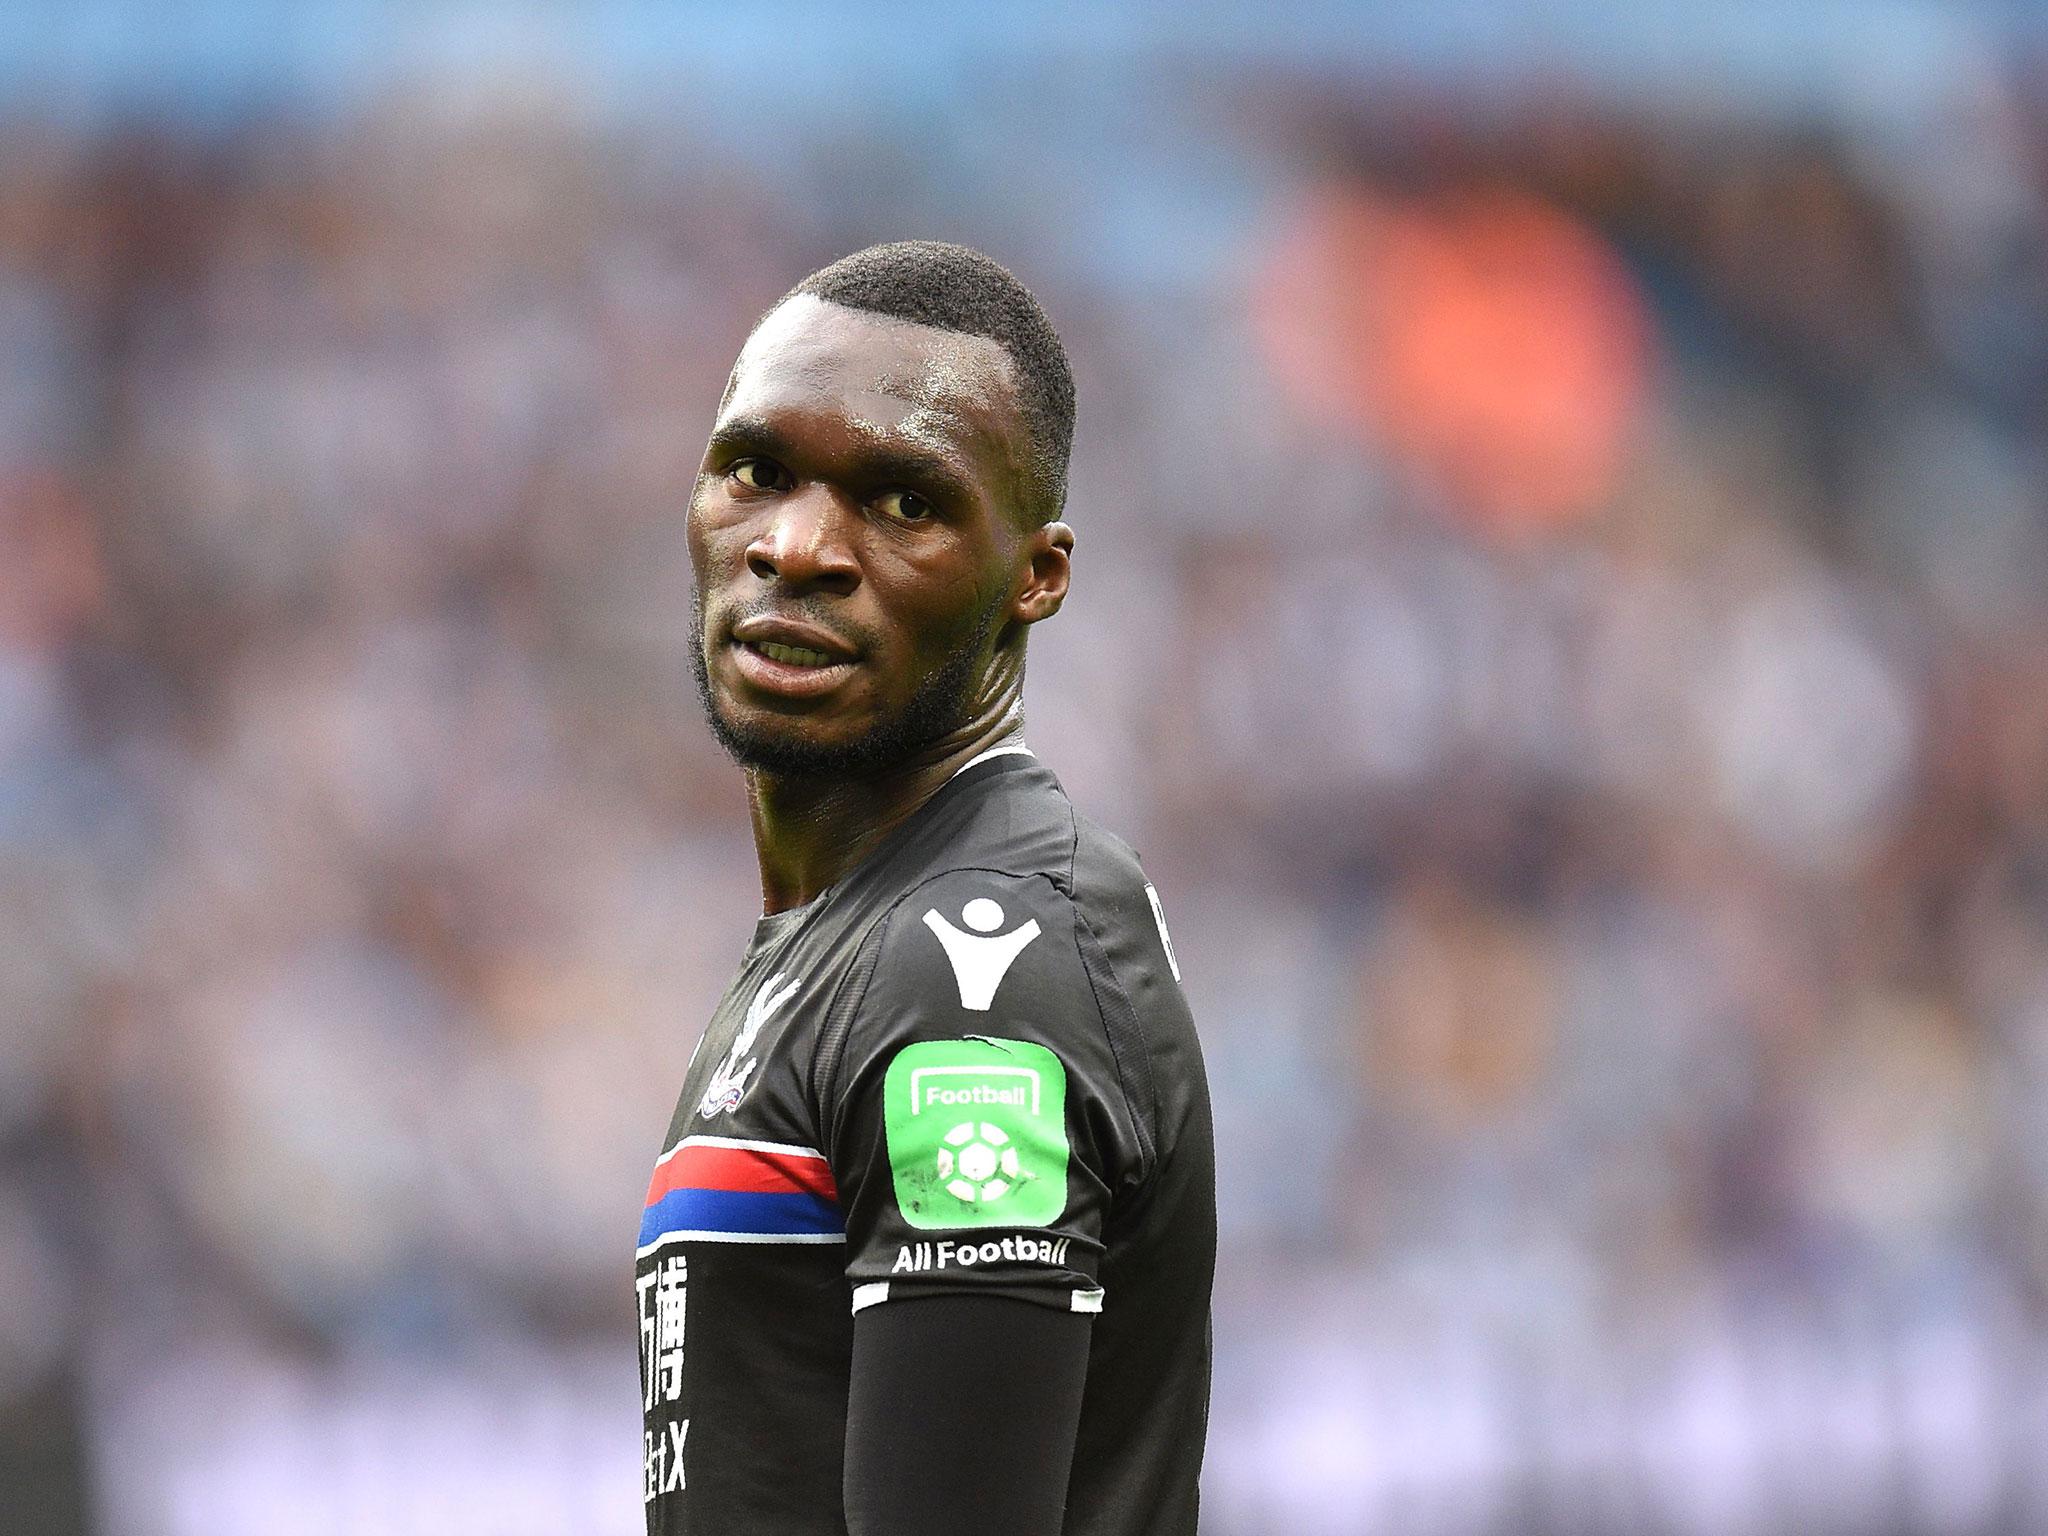 Christian Benteke returns to action this weekend with point to prove at Crystal Palace